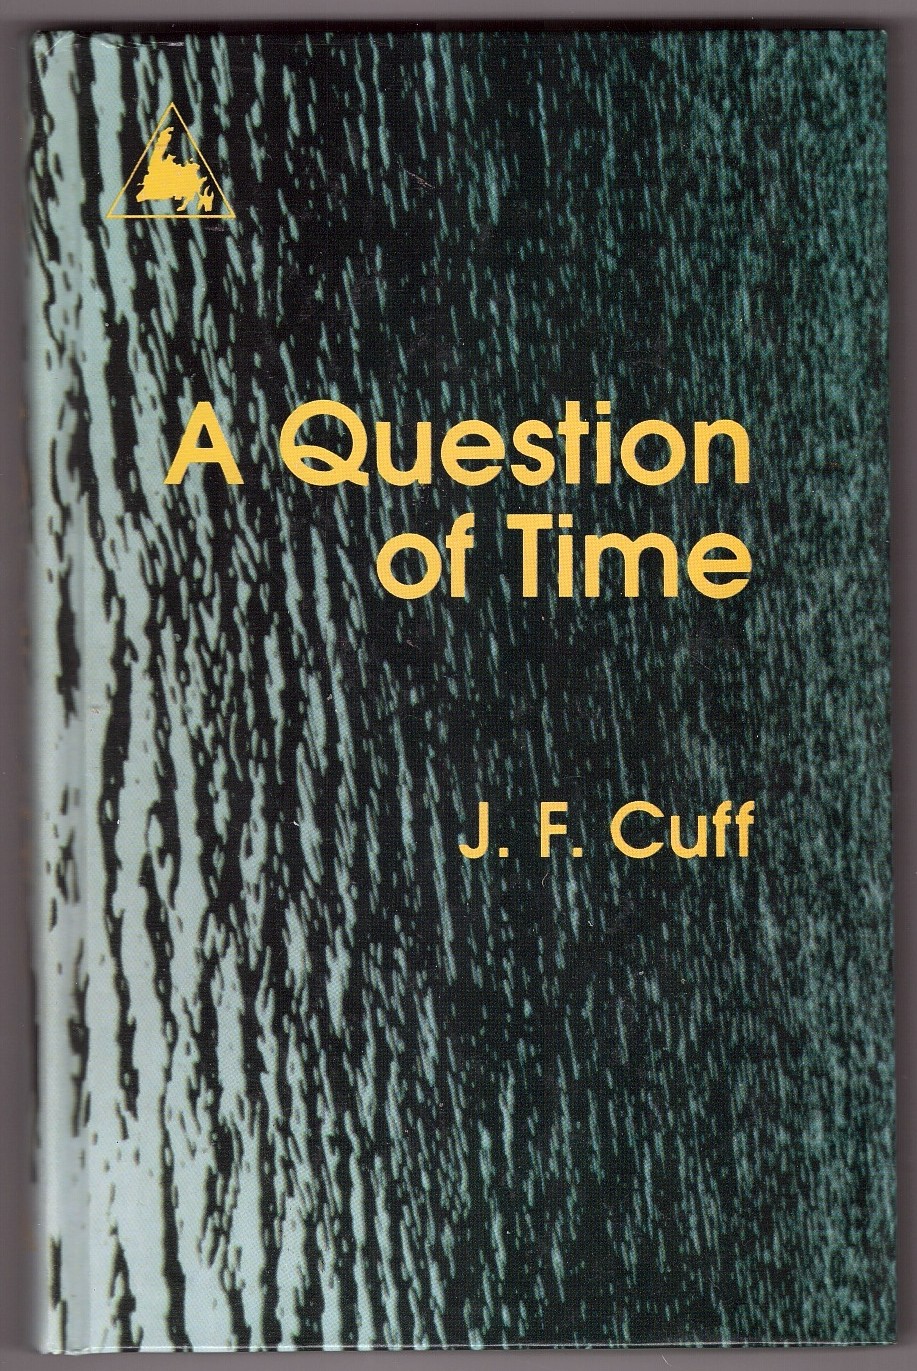 CUFF, JEFFREY F. - A Question of Time